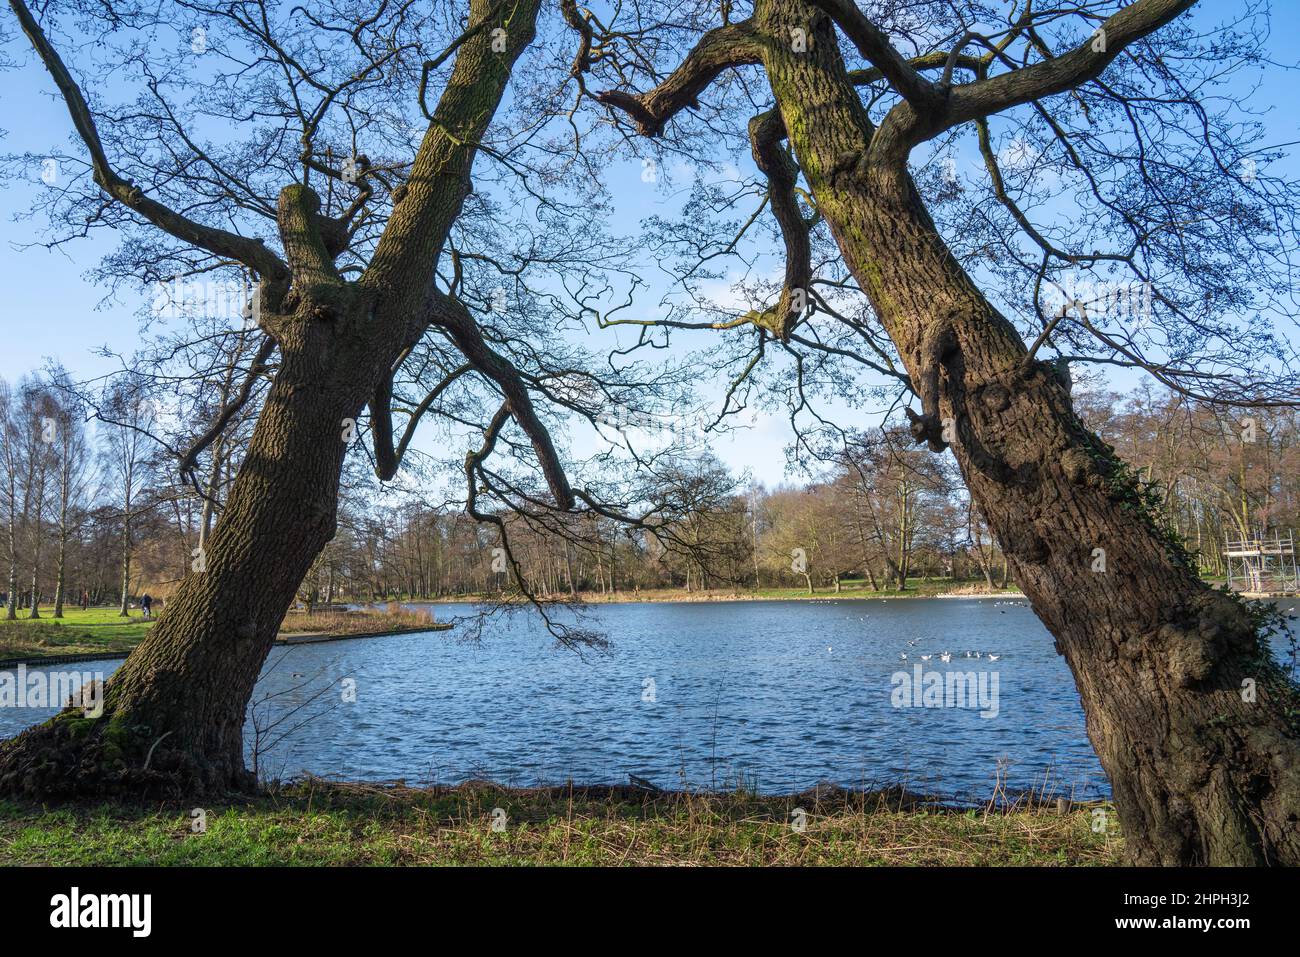 Old trees reflections, open spaces, parkland, forest, woodland, local amenity, lake side, landscape, deciduous, evergreen, kissing, leaning touching. Stock Photo